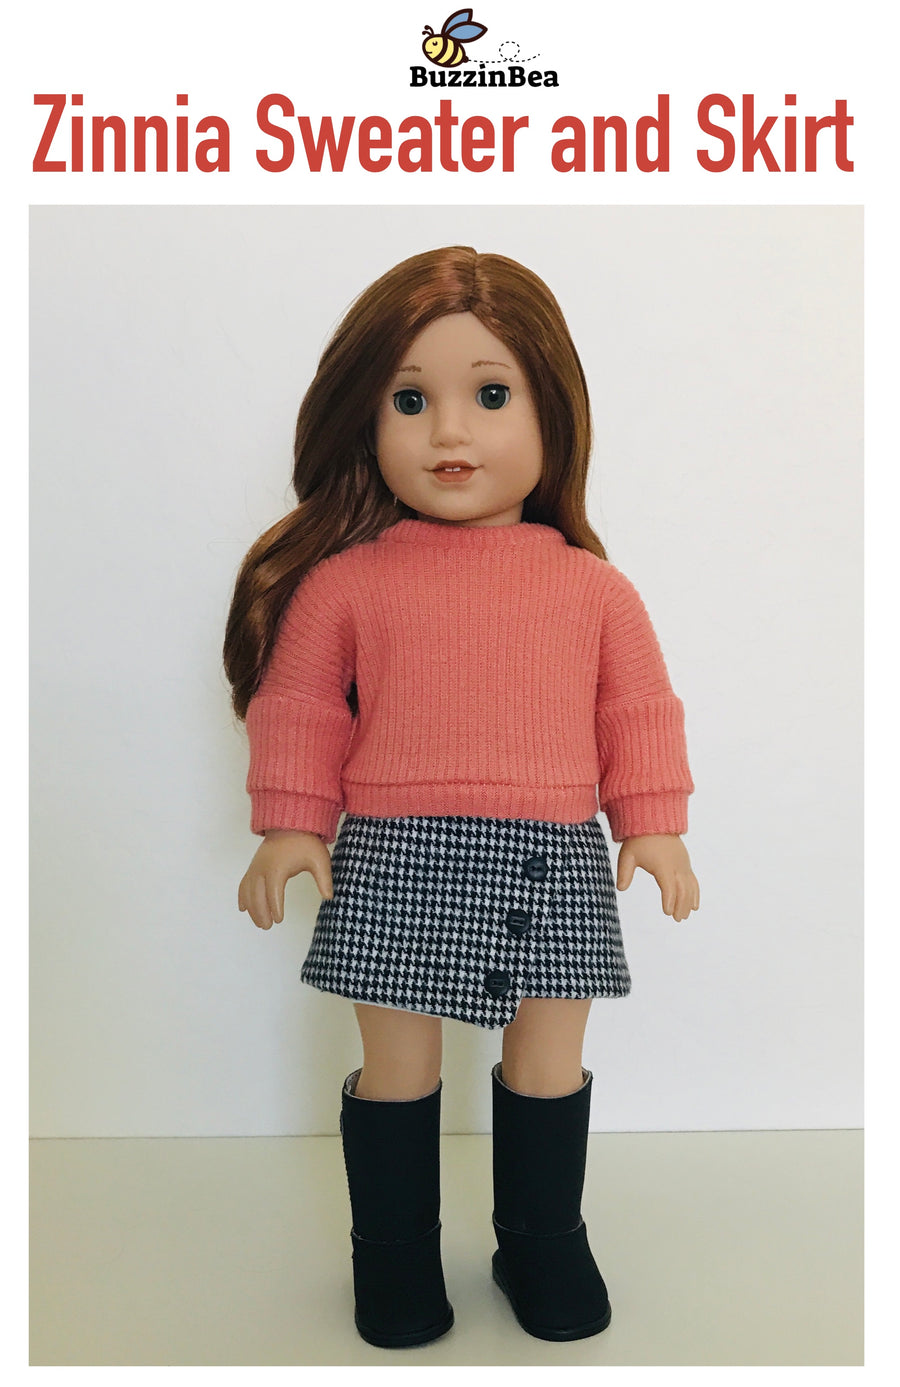 Zinnia Skirt and Sweater for 18-inch Dolls PDF Sewing Pattern